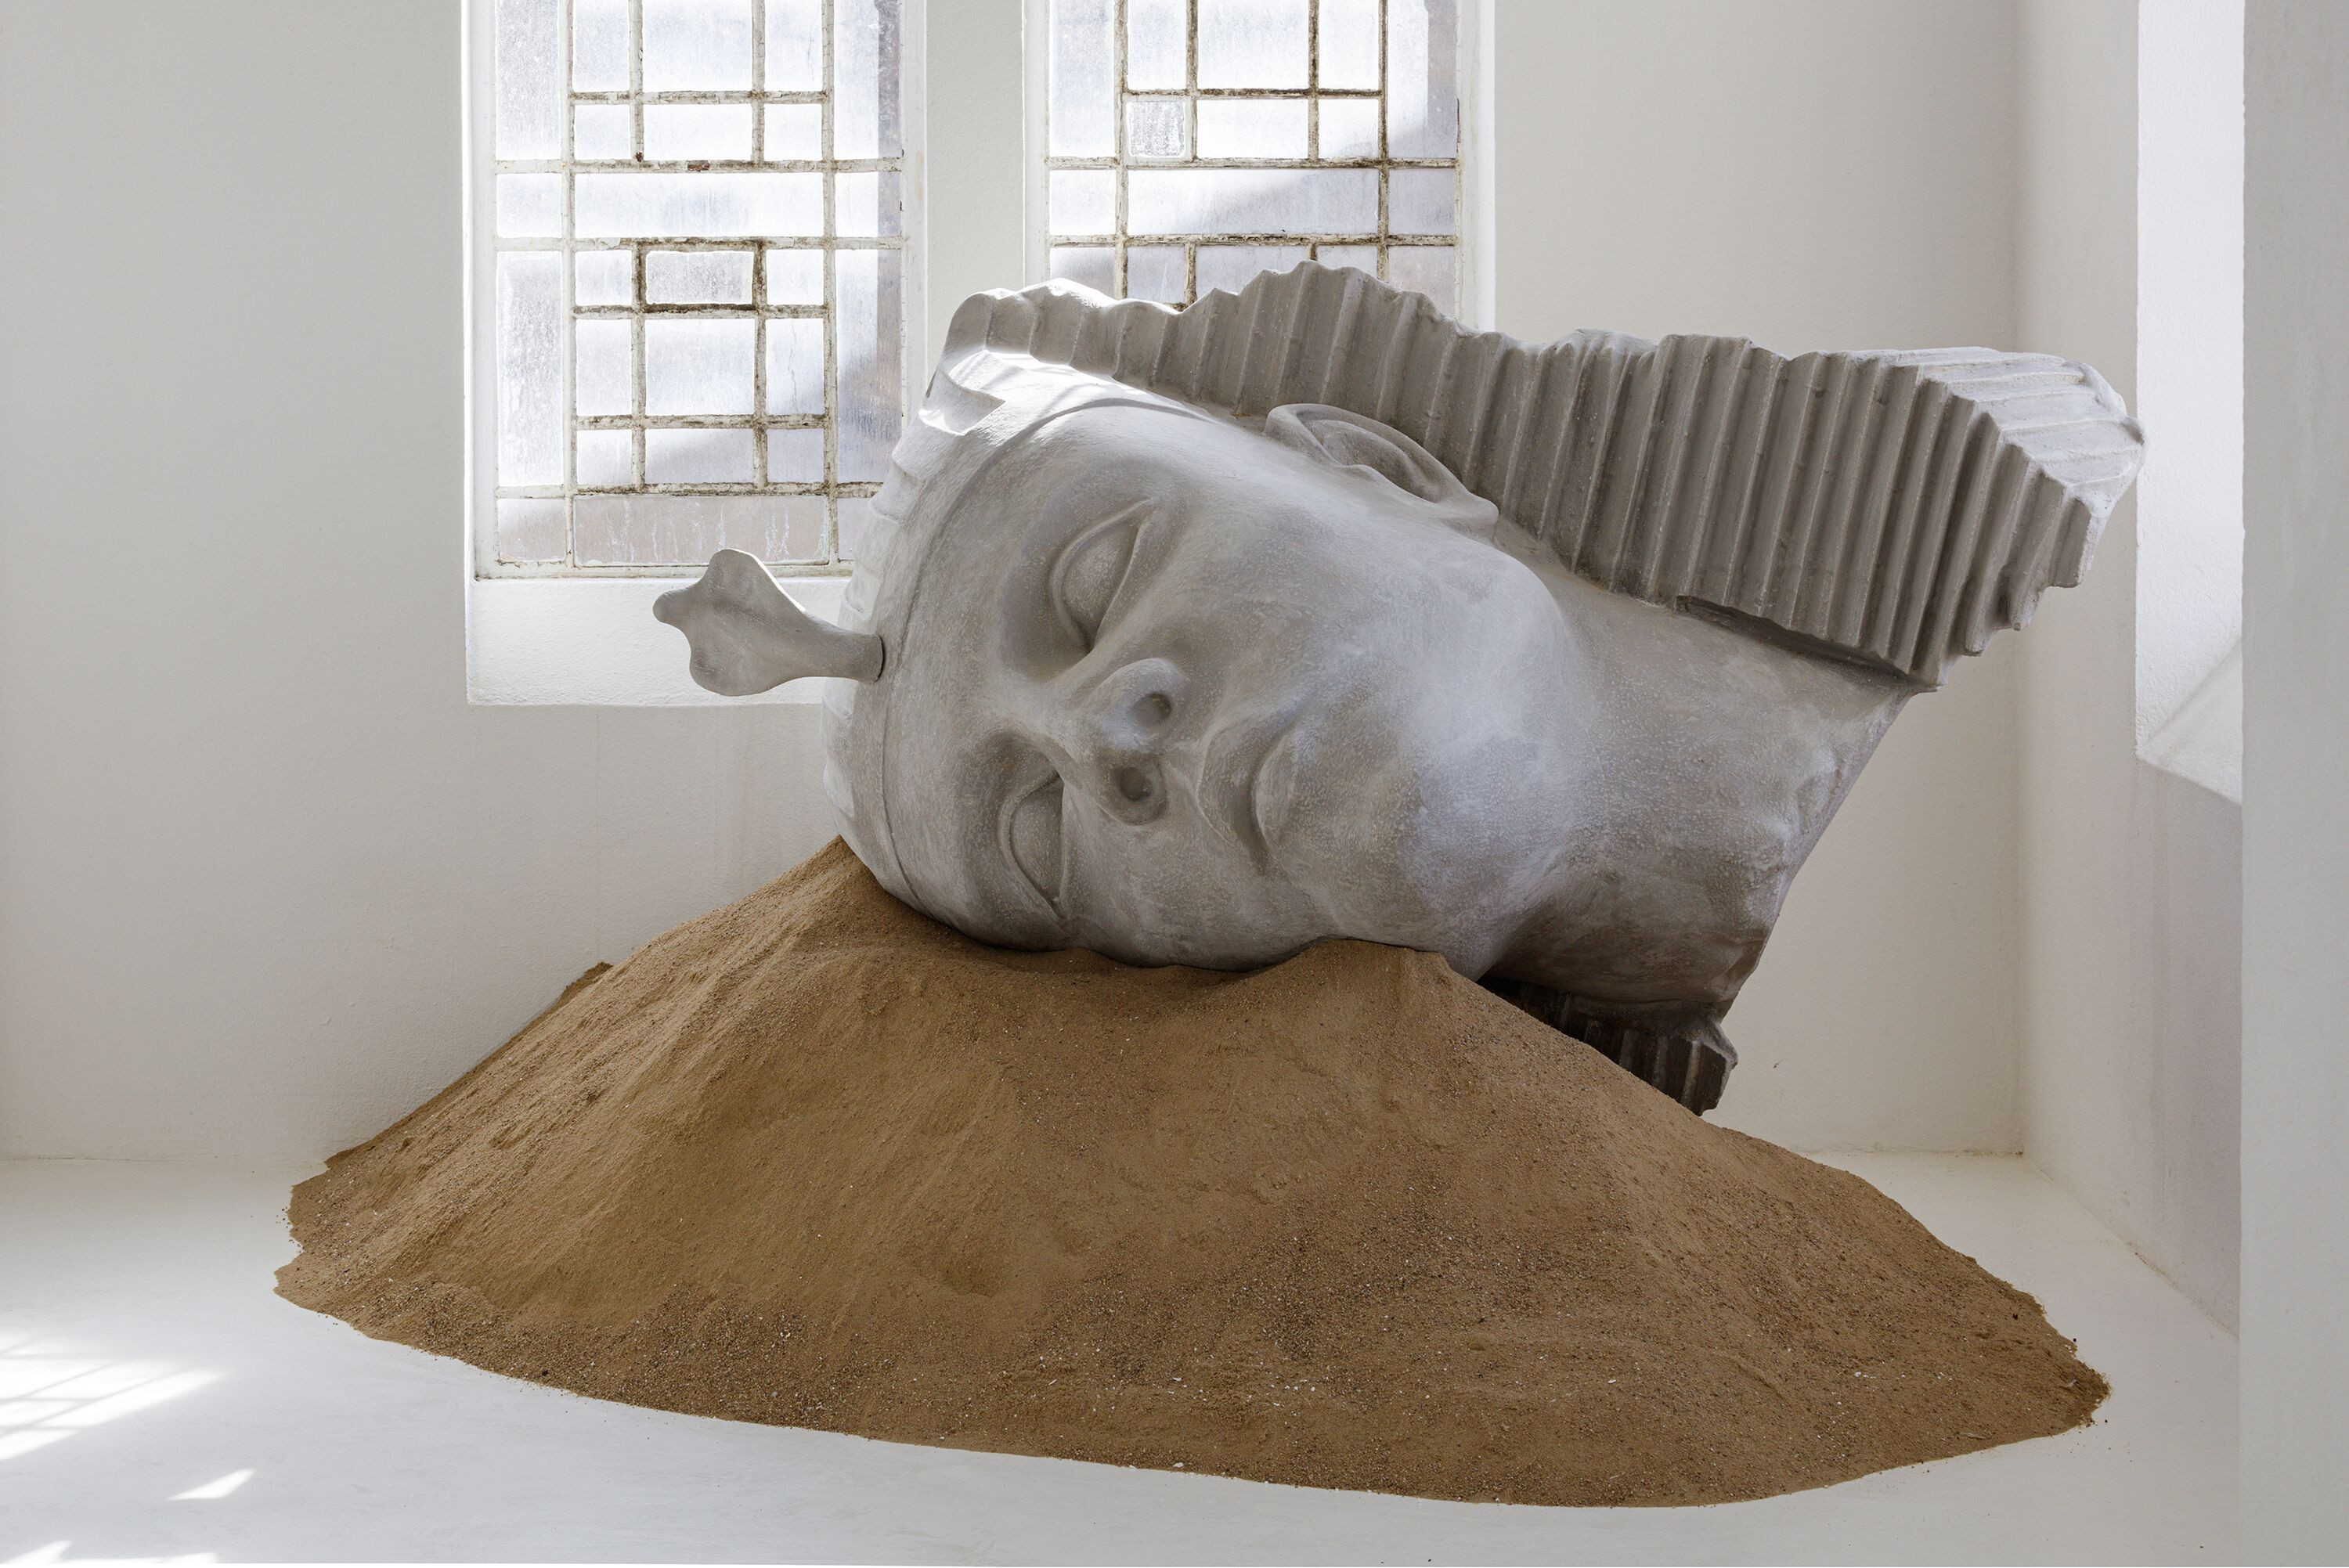 Zuzanna Czebatul, Their New Power (Head), 2020. Polystyrene, acrylic and sand, 160×110 x 120 cm. From the exhibition &#39;The Singing Dunes’, CAC-La synagogue de Delme